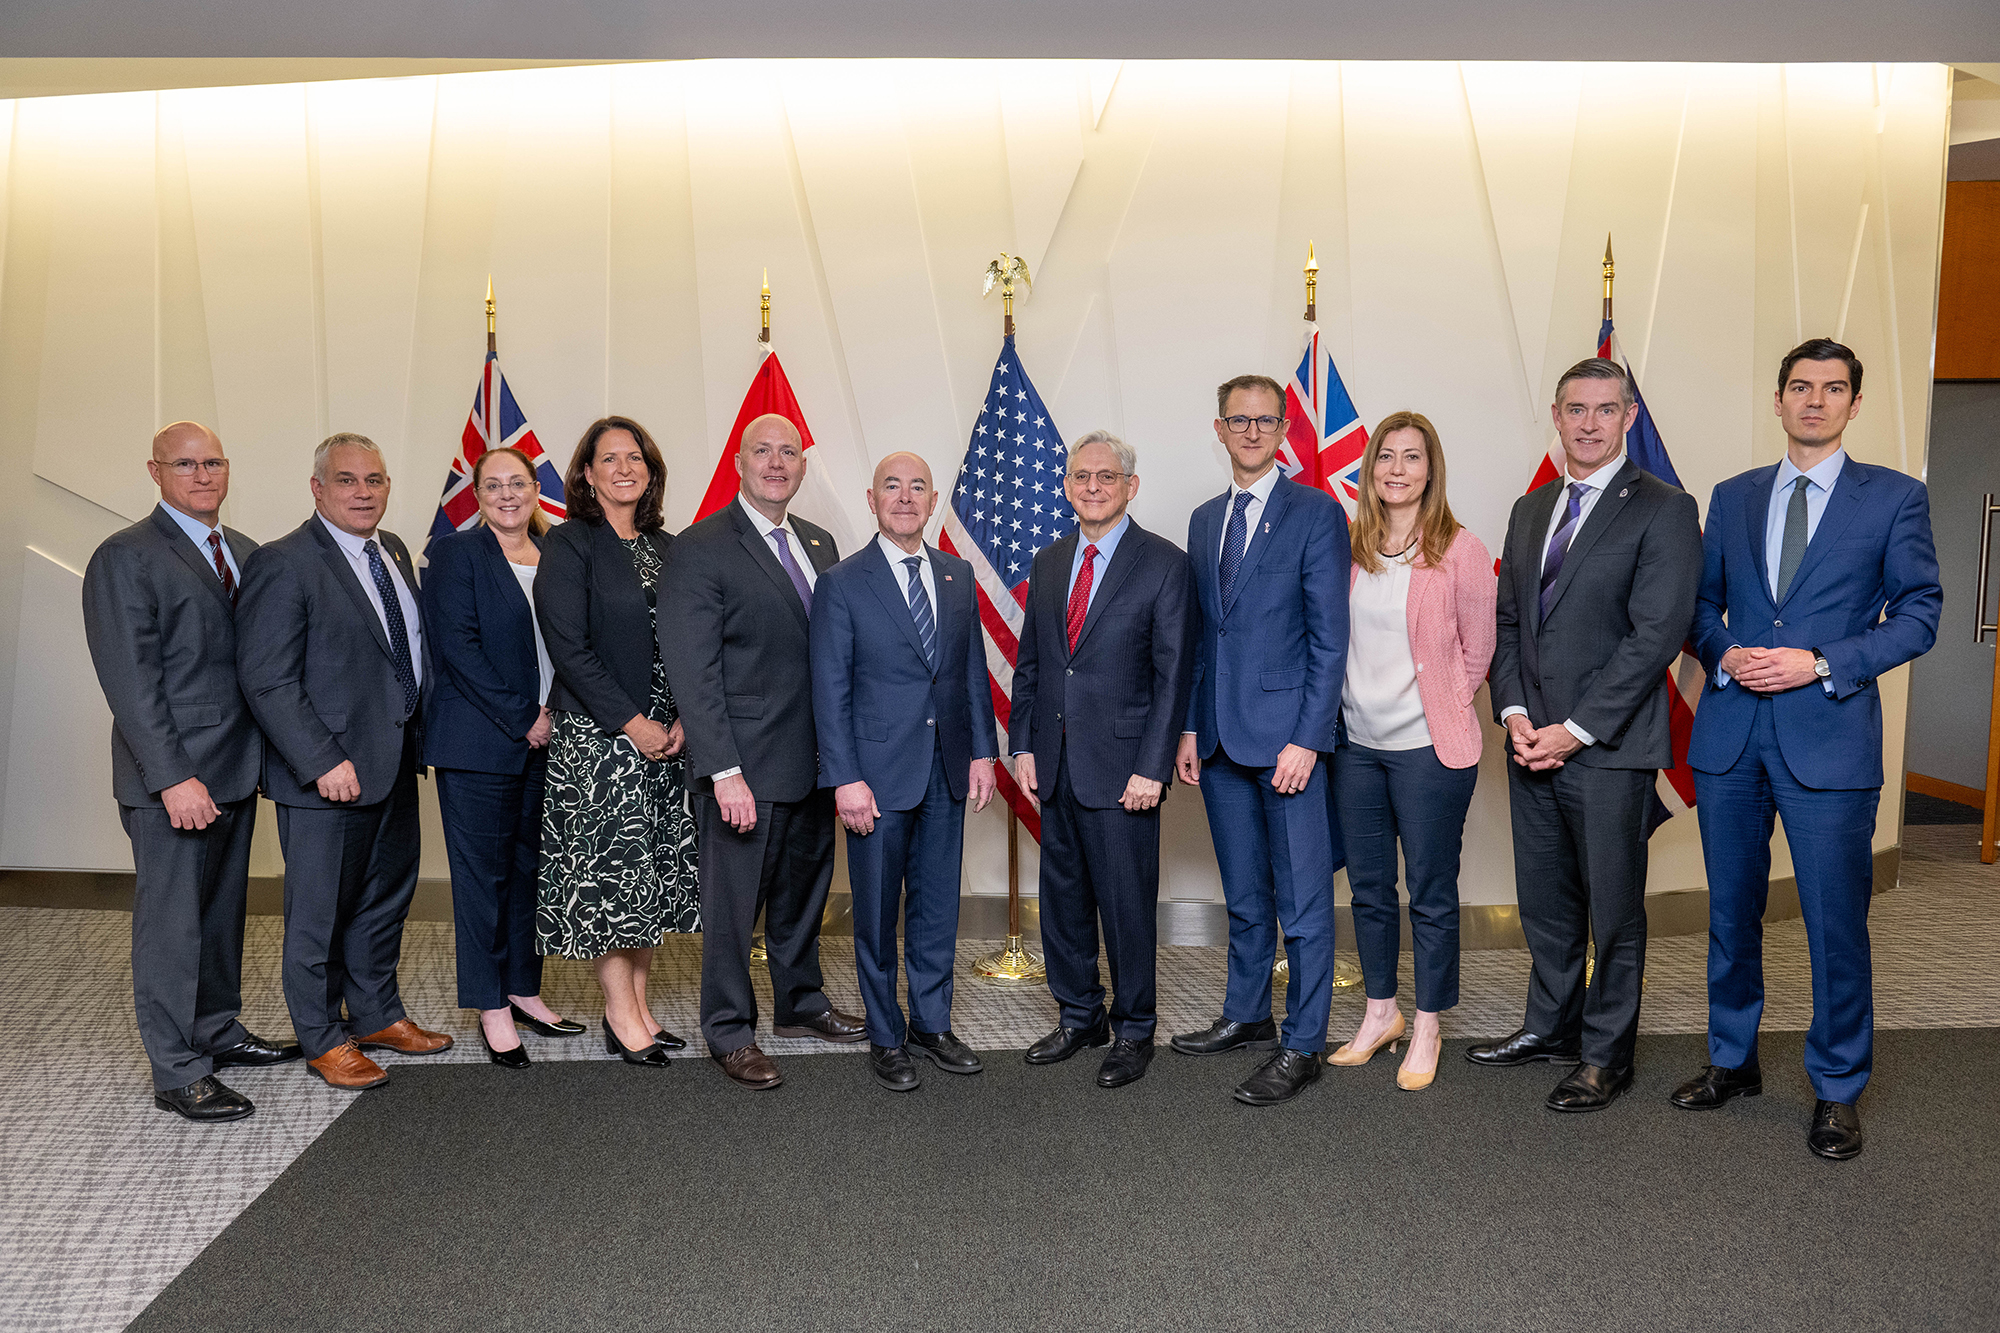 Annual Principals Meeting of the Five Eyes Law Enforcement Group concludes